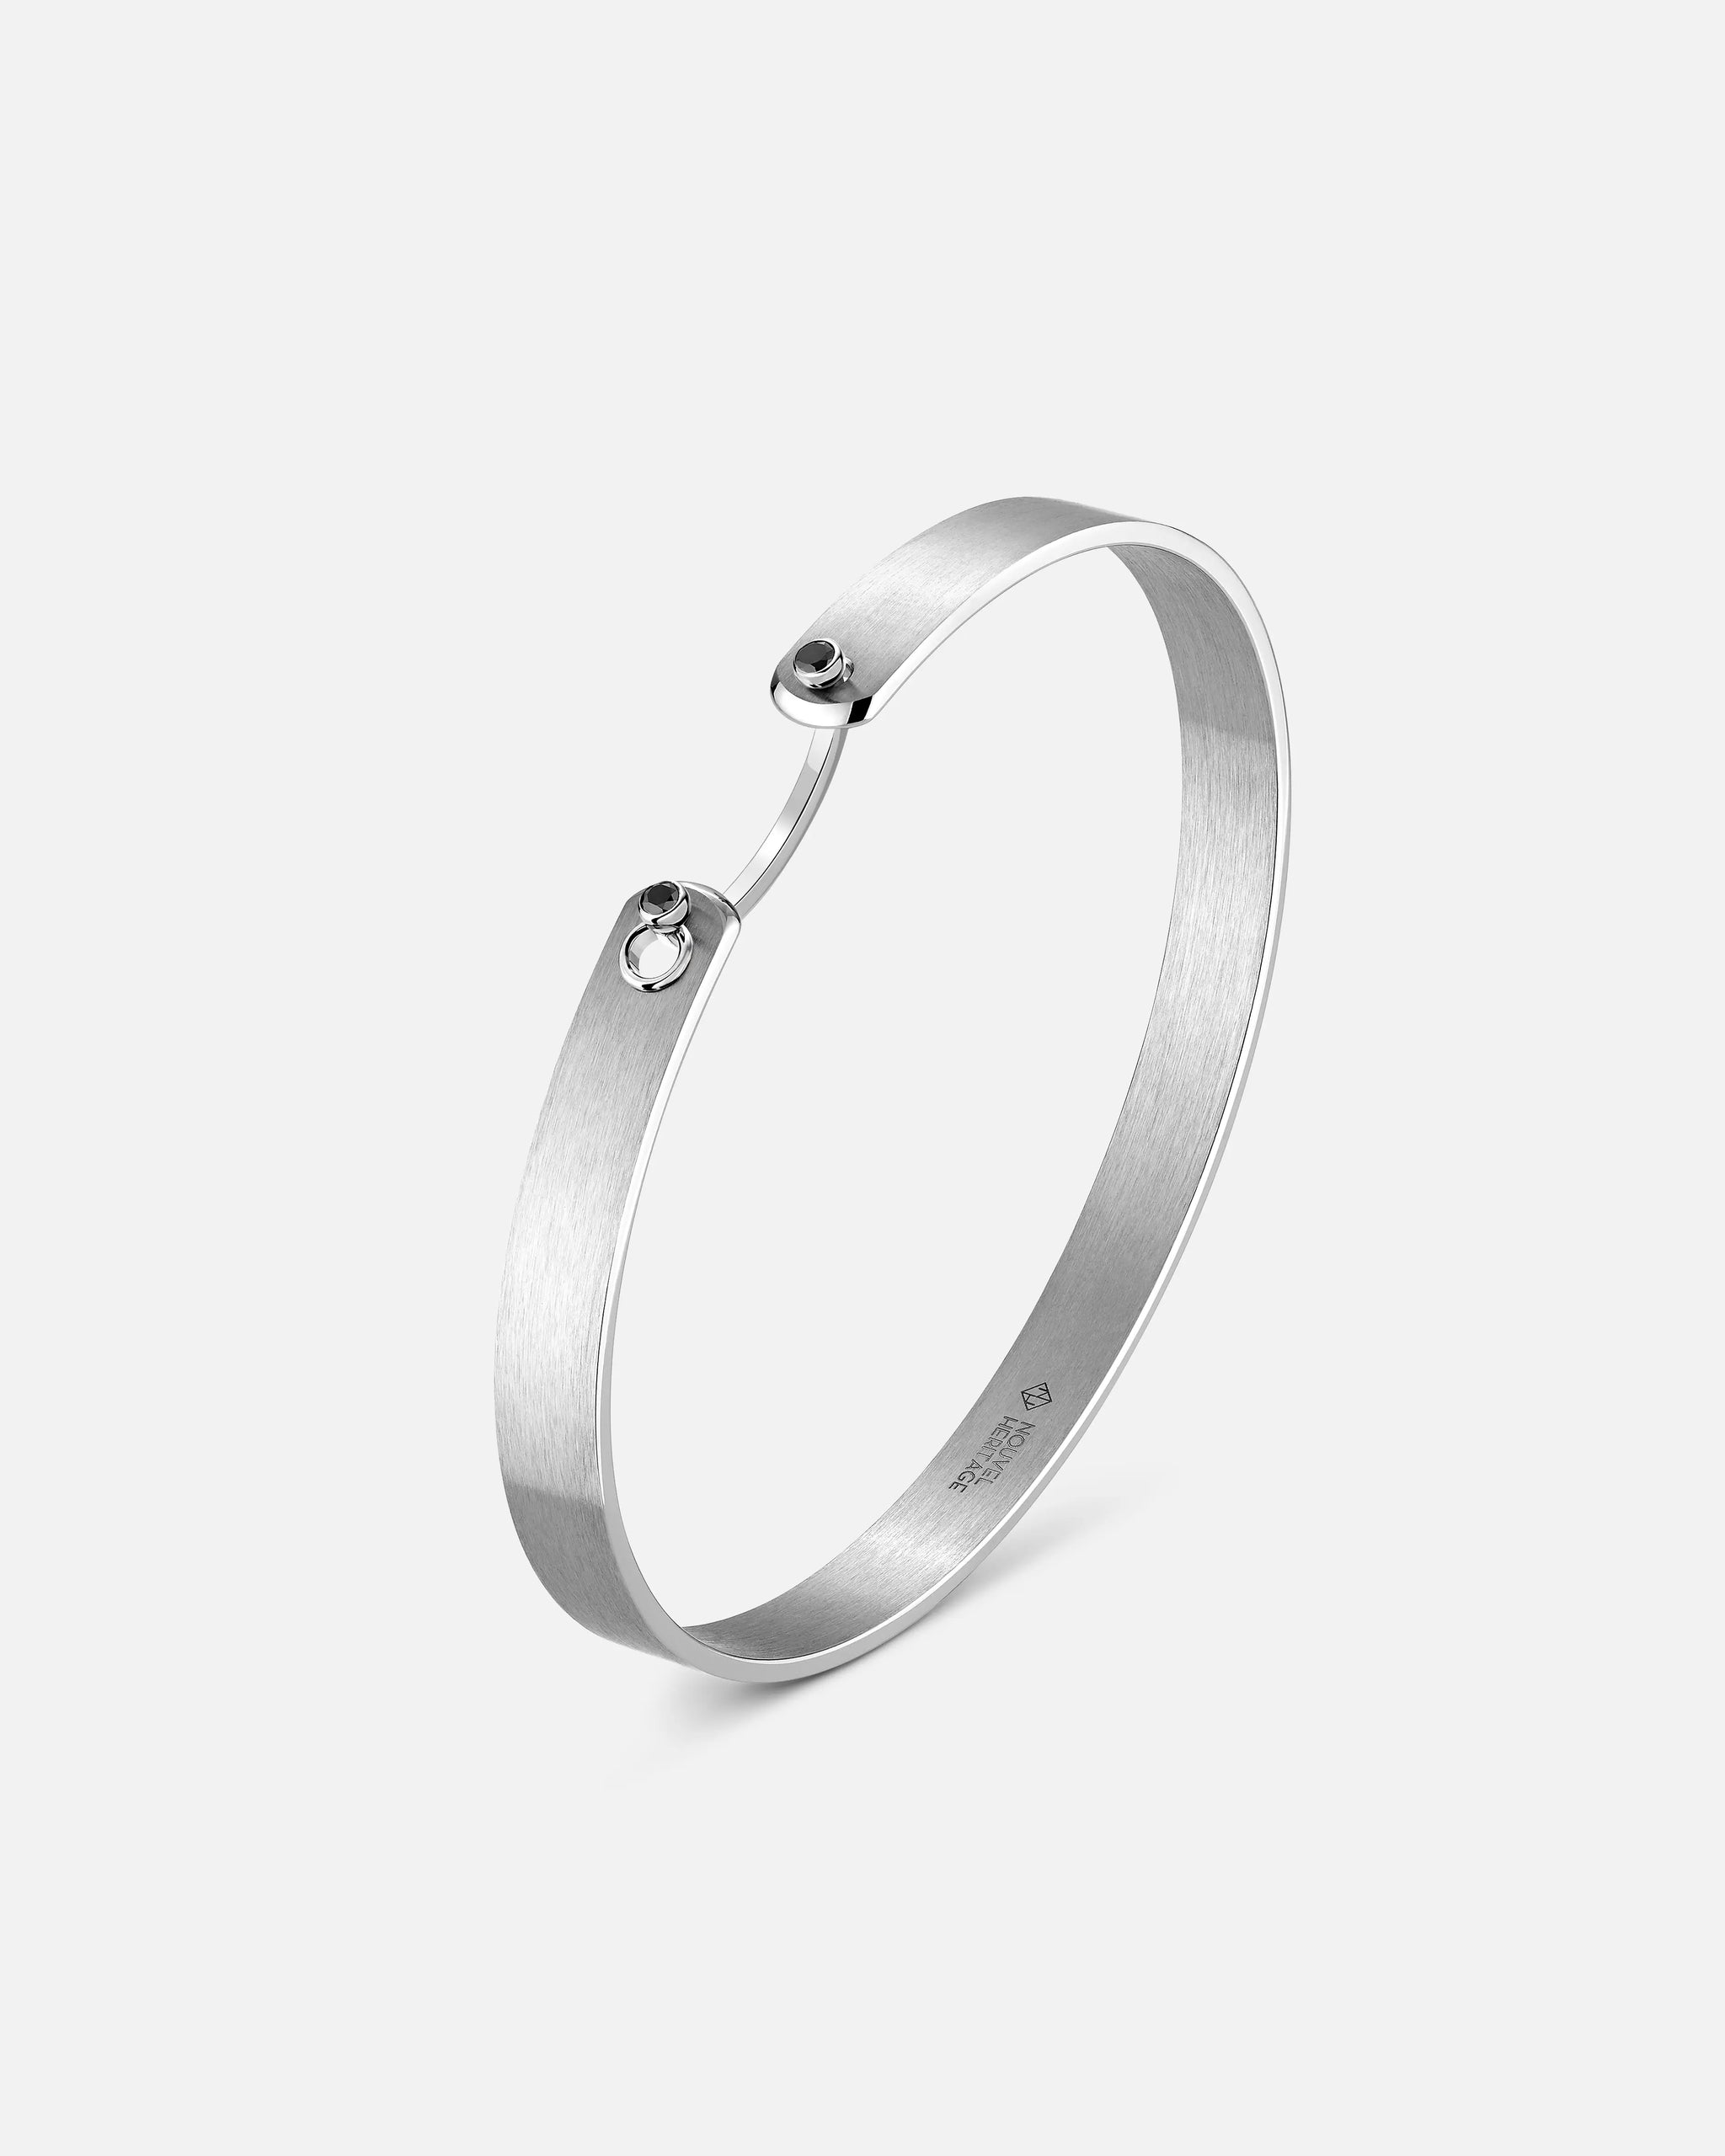 Paris From The Sky GM Mood Bangle with Black Diamonds in White Gold - 1 - Nouvel Heritage